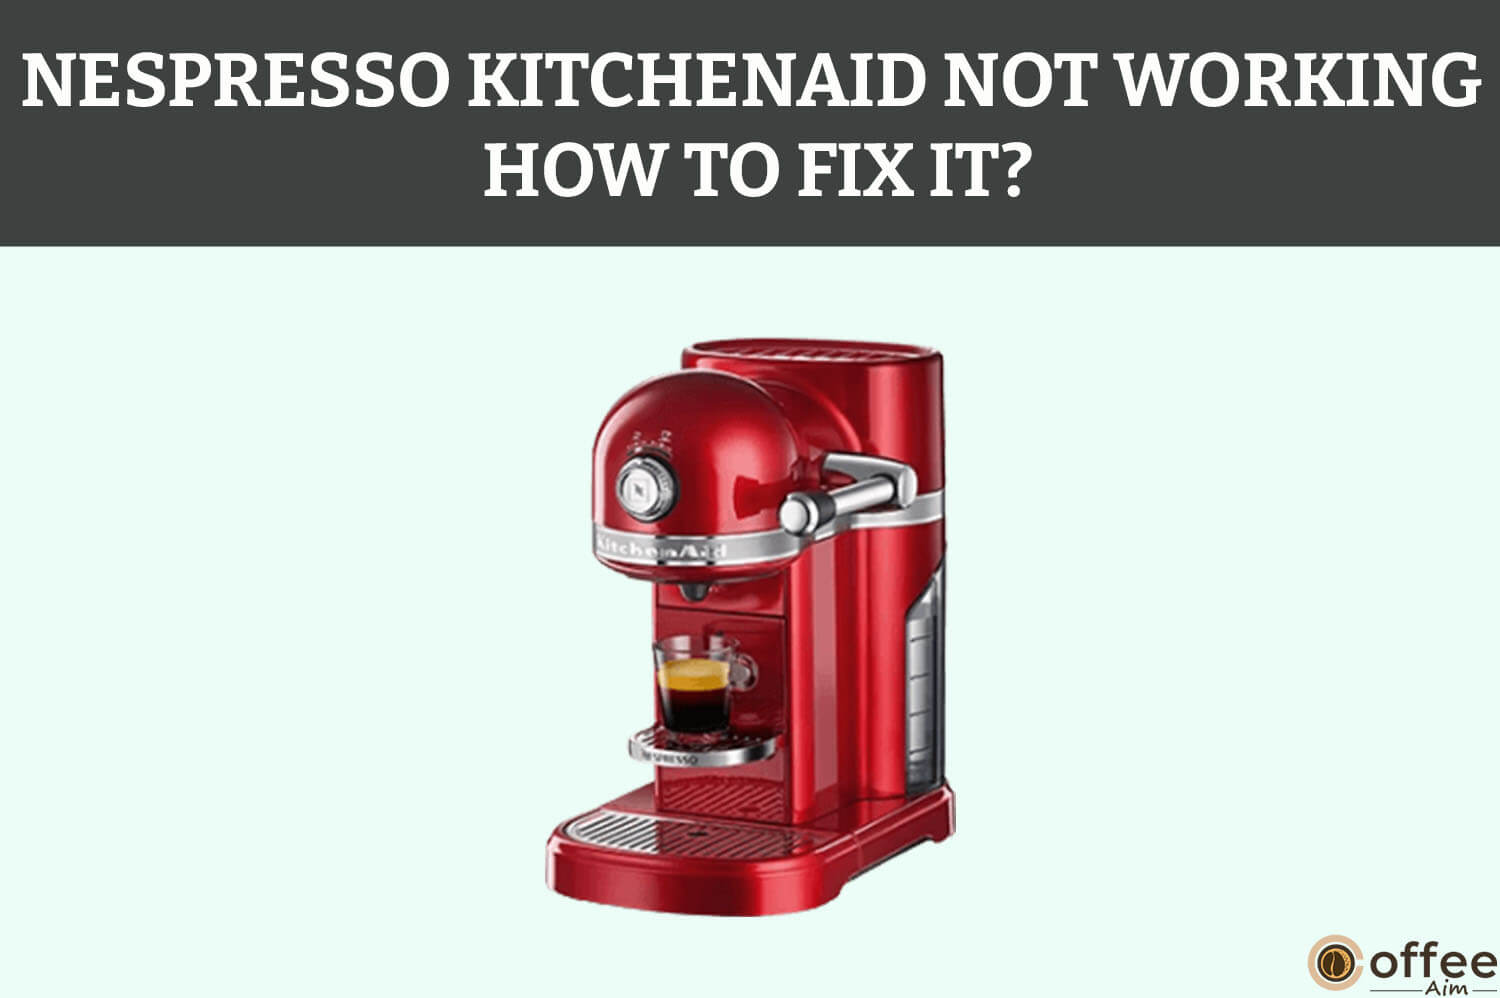 Featured image for the article "Nespresso KitchenAid Not Working How to Fix It"